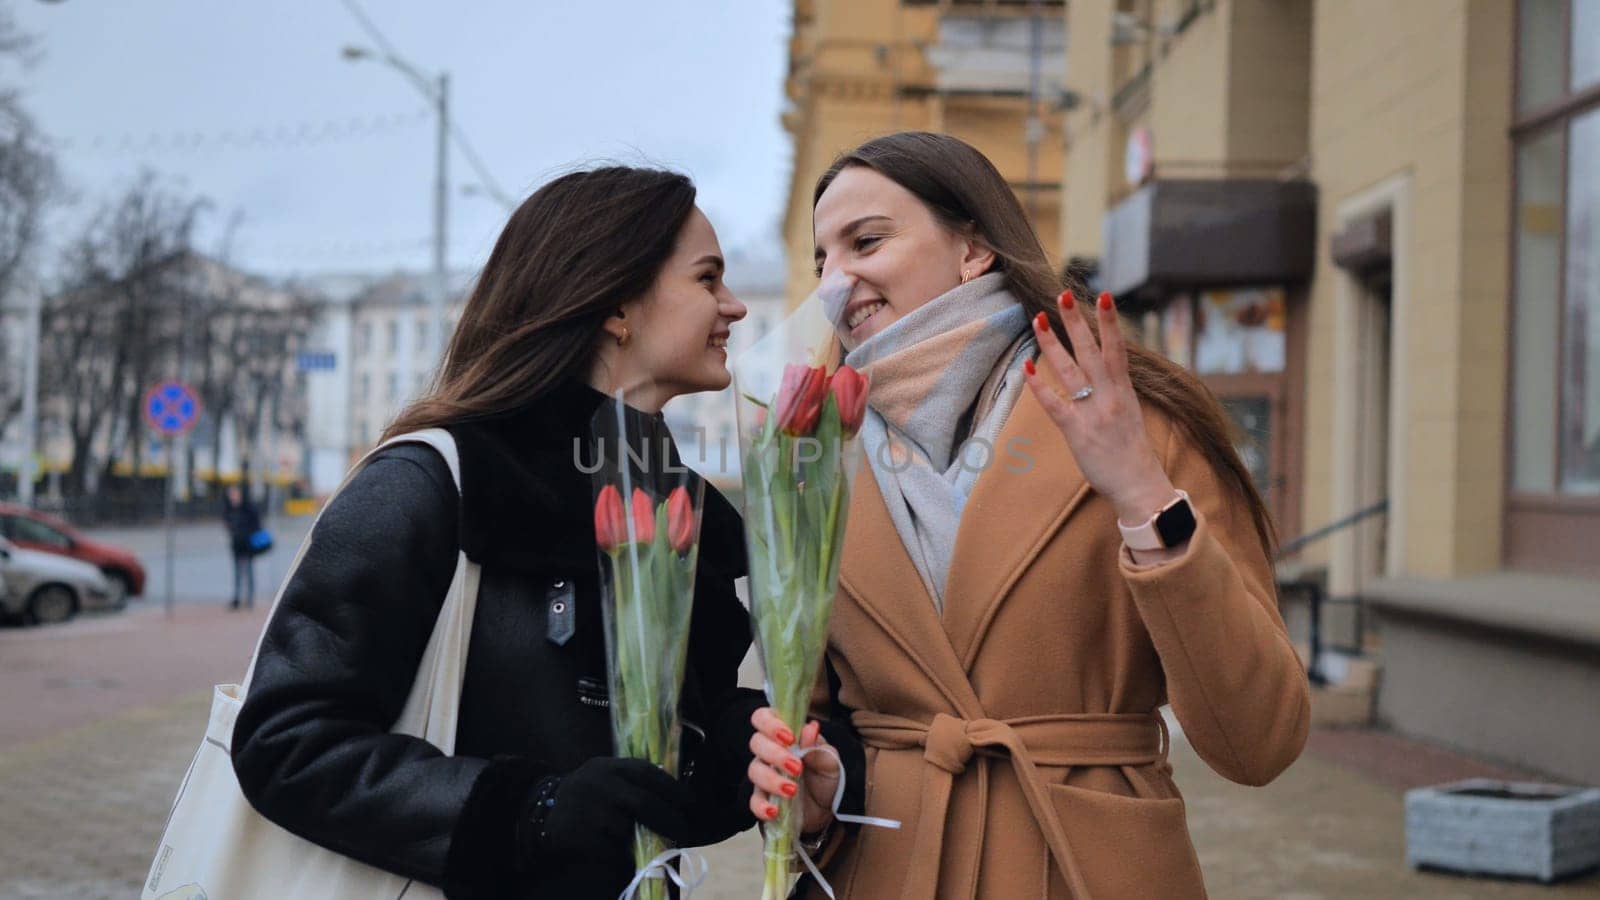 Two young girls, friends with flowers in their hands, walk along a city street by DovidPro